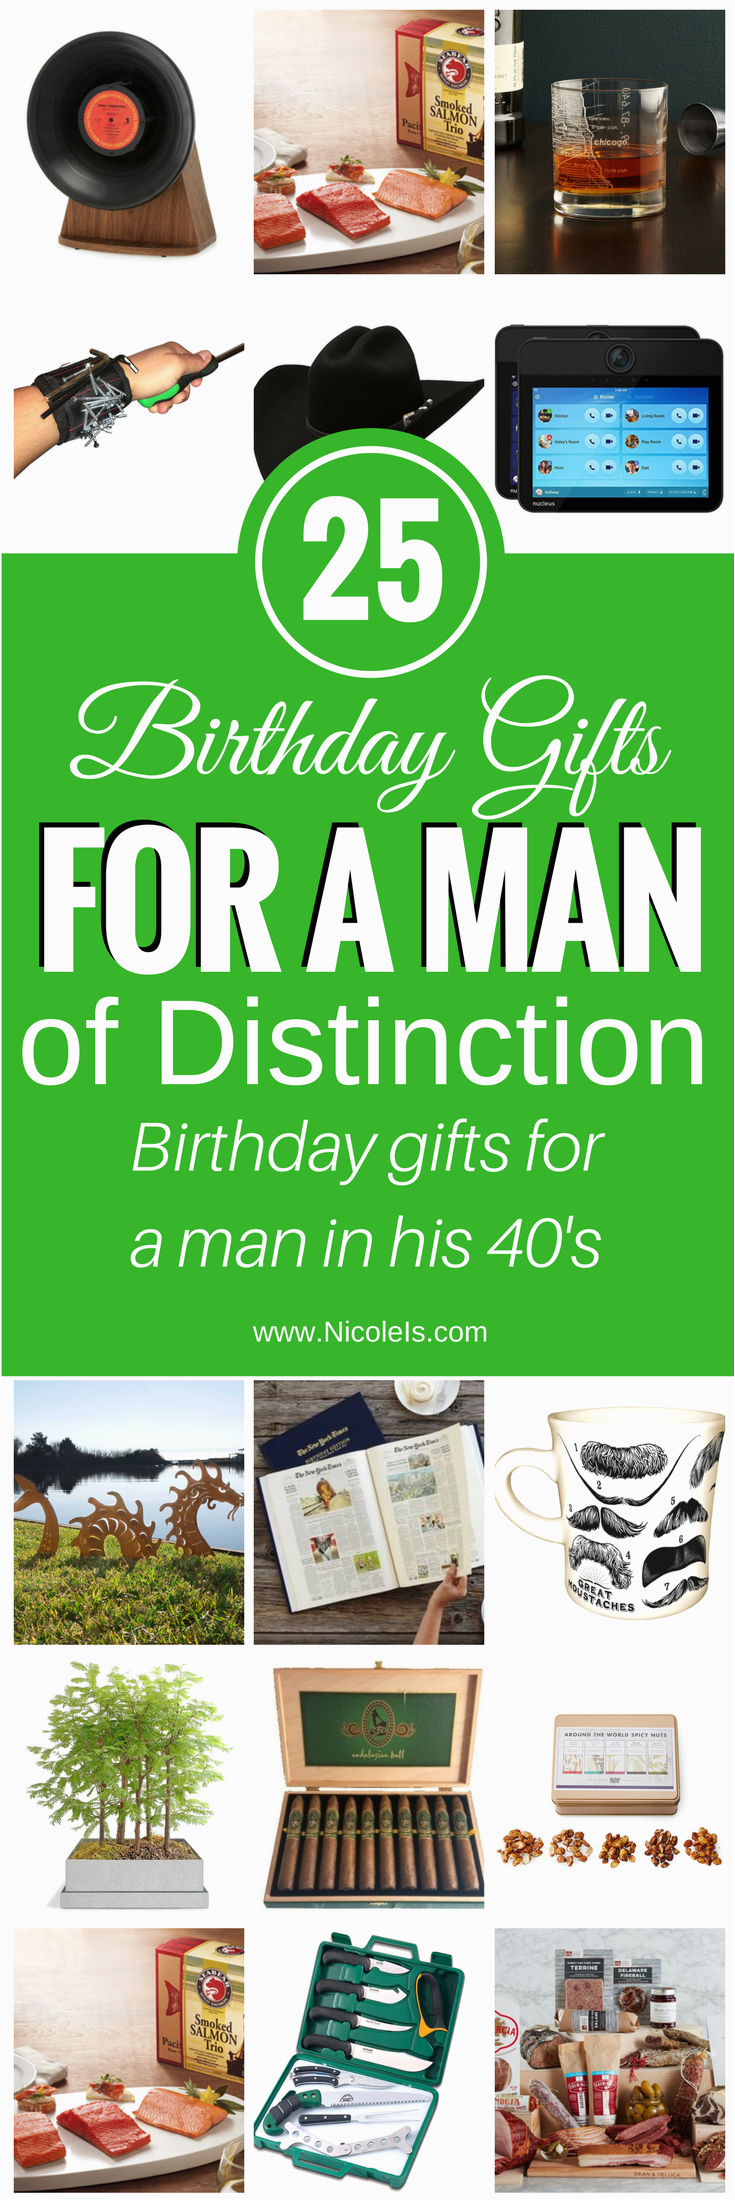 25 birthday gifts for a man